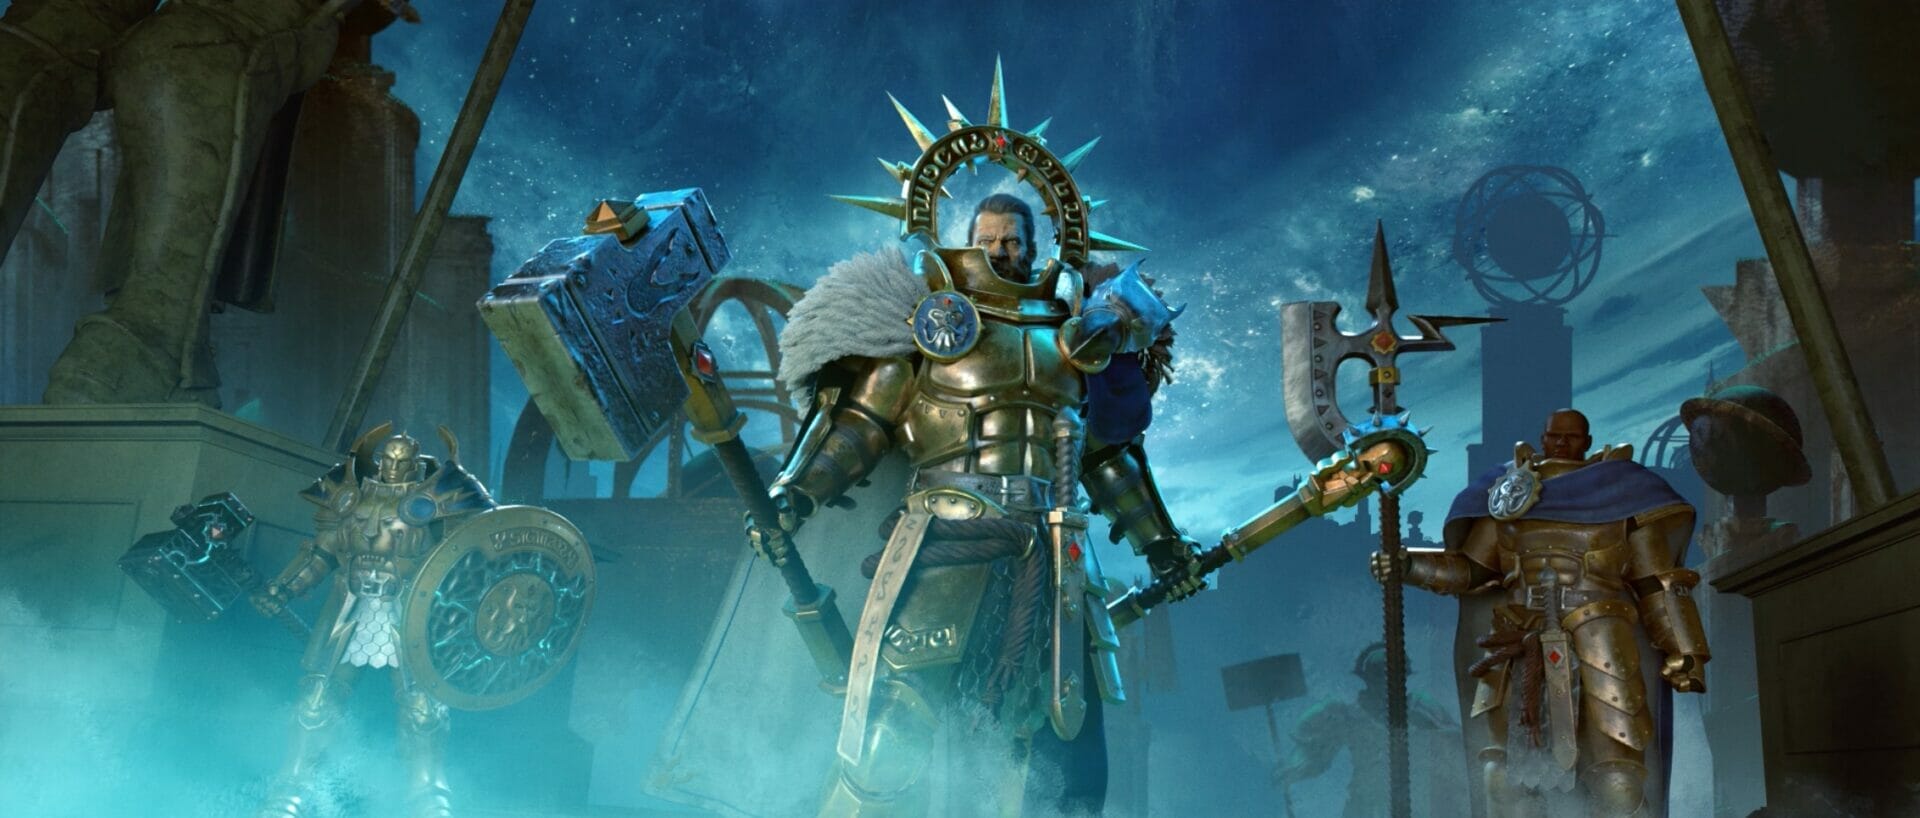 Warhammer Age of Sigmar: New Stormcast Revealed by M2 Animation